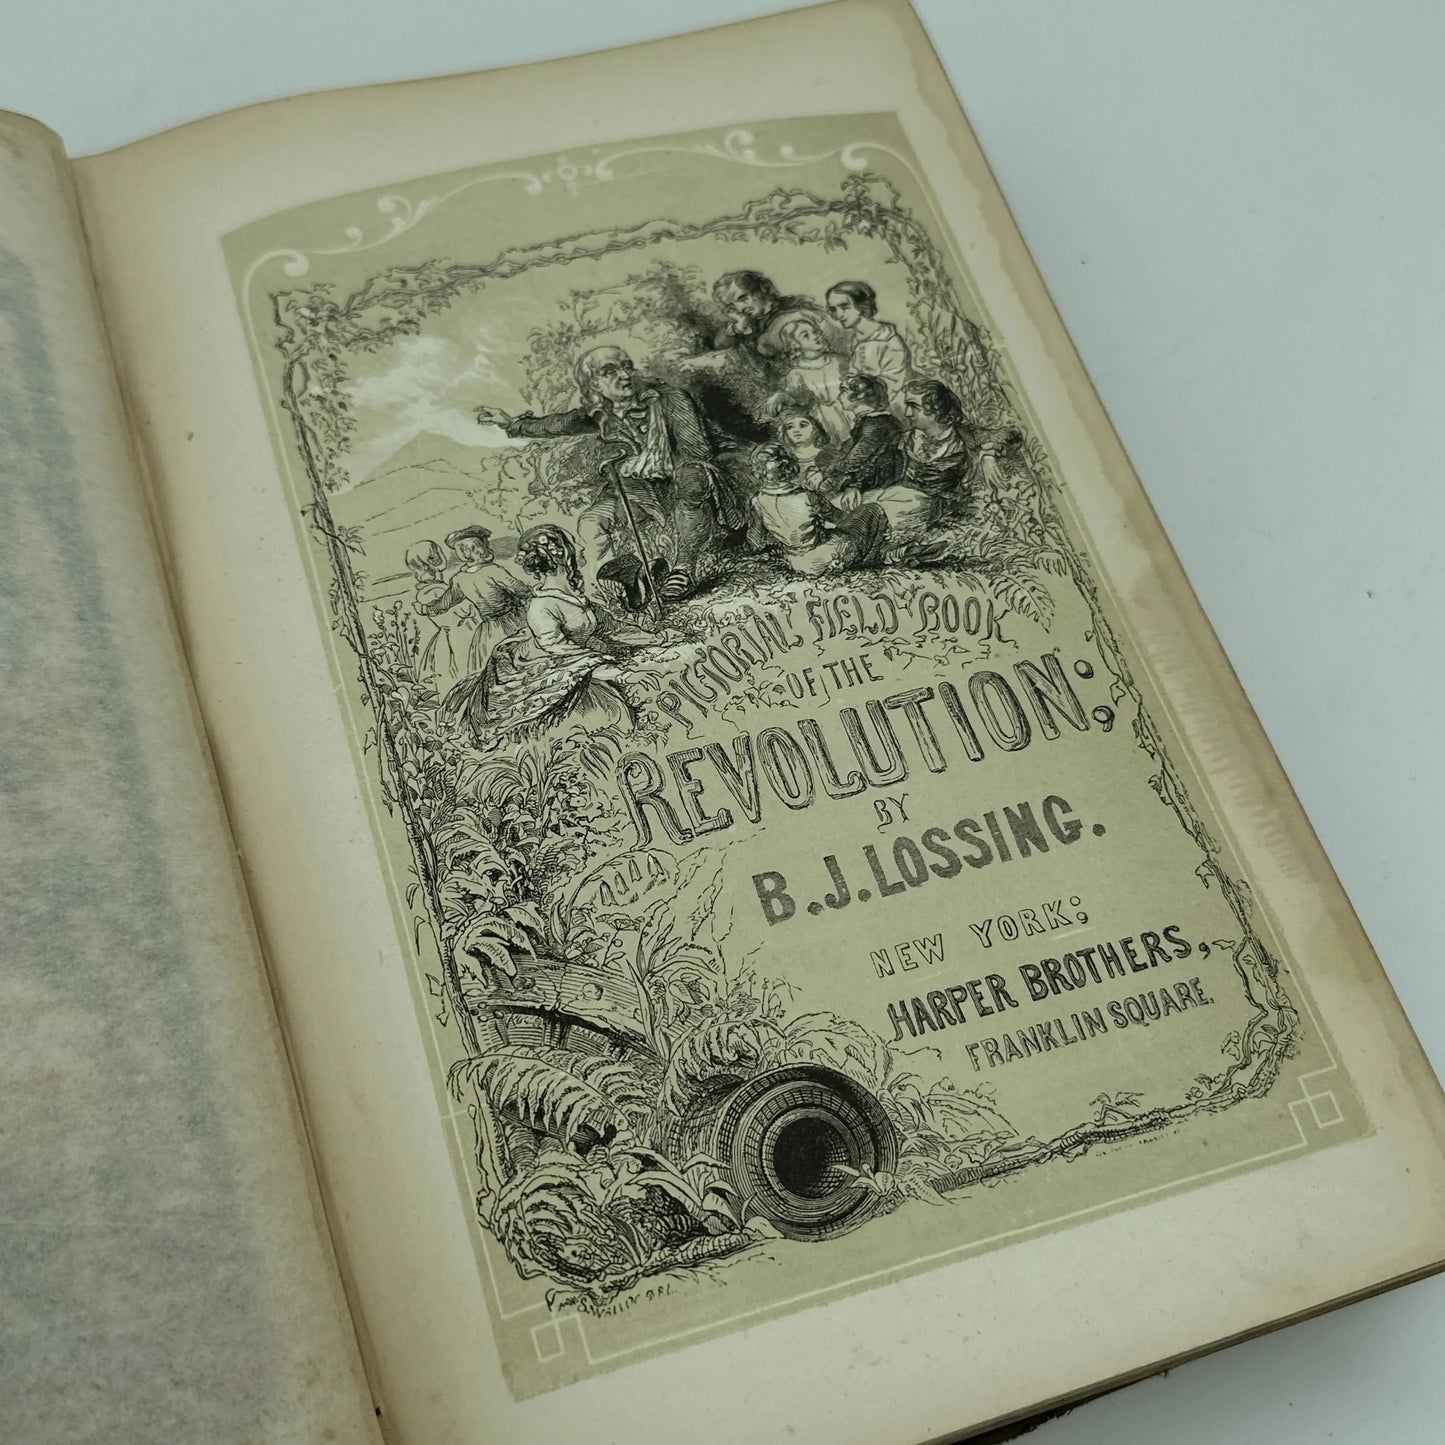 1859 "Pictorial Field-Book of the Revolution by Benson Lossing"  — Two volumes